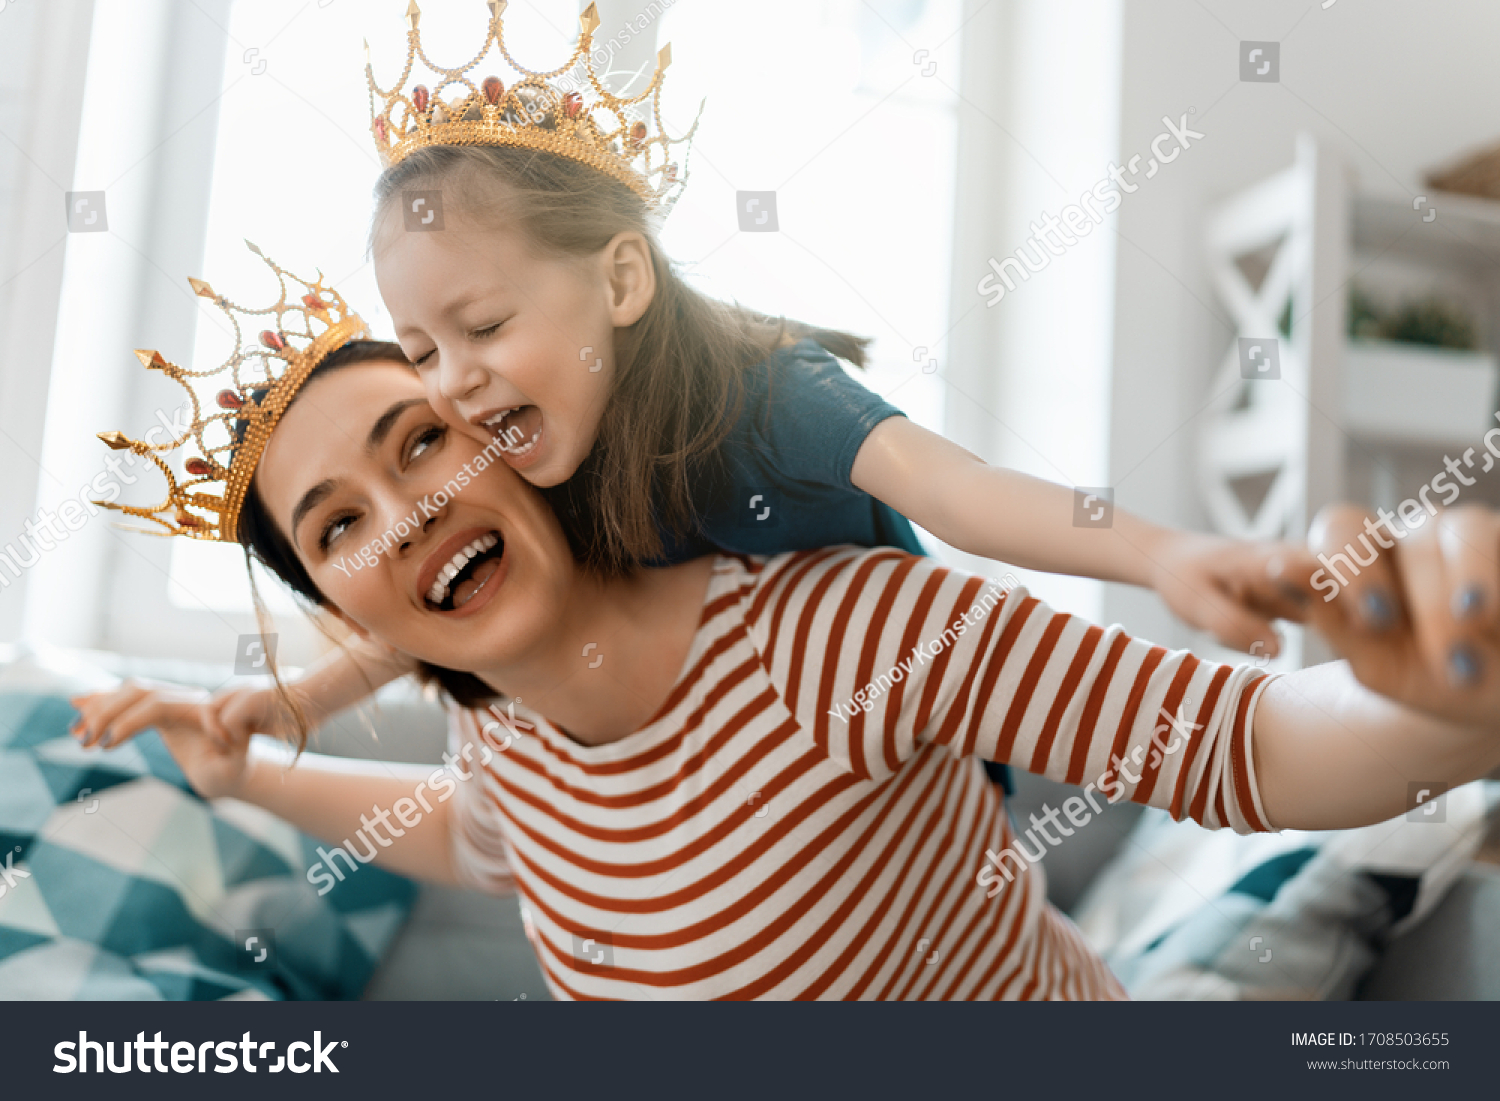 Happy loving family. Mother and her daughter child girl playing and hugging at home. #1708503655